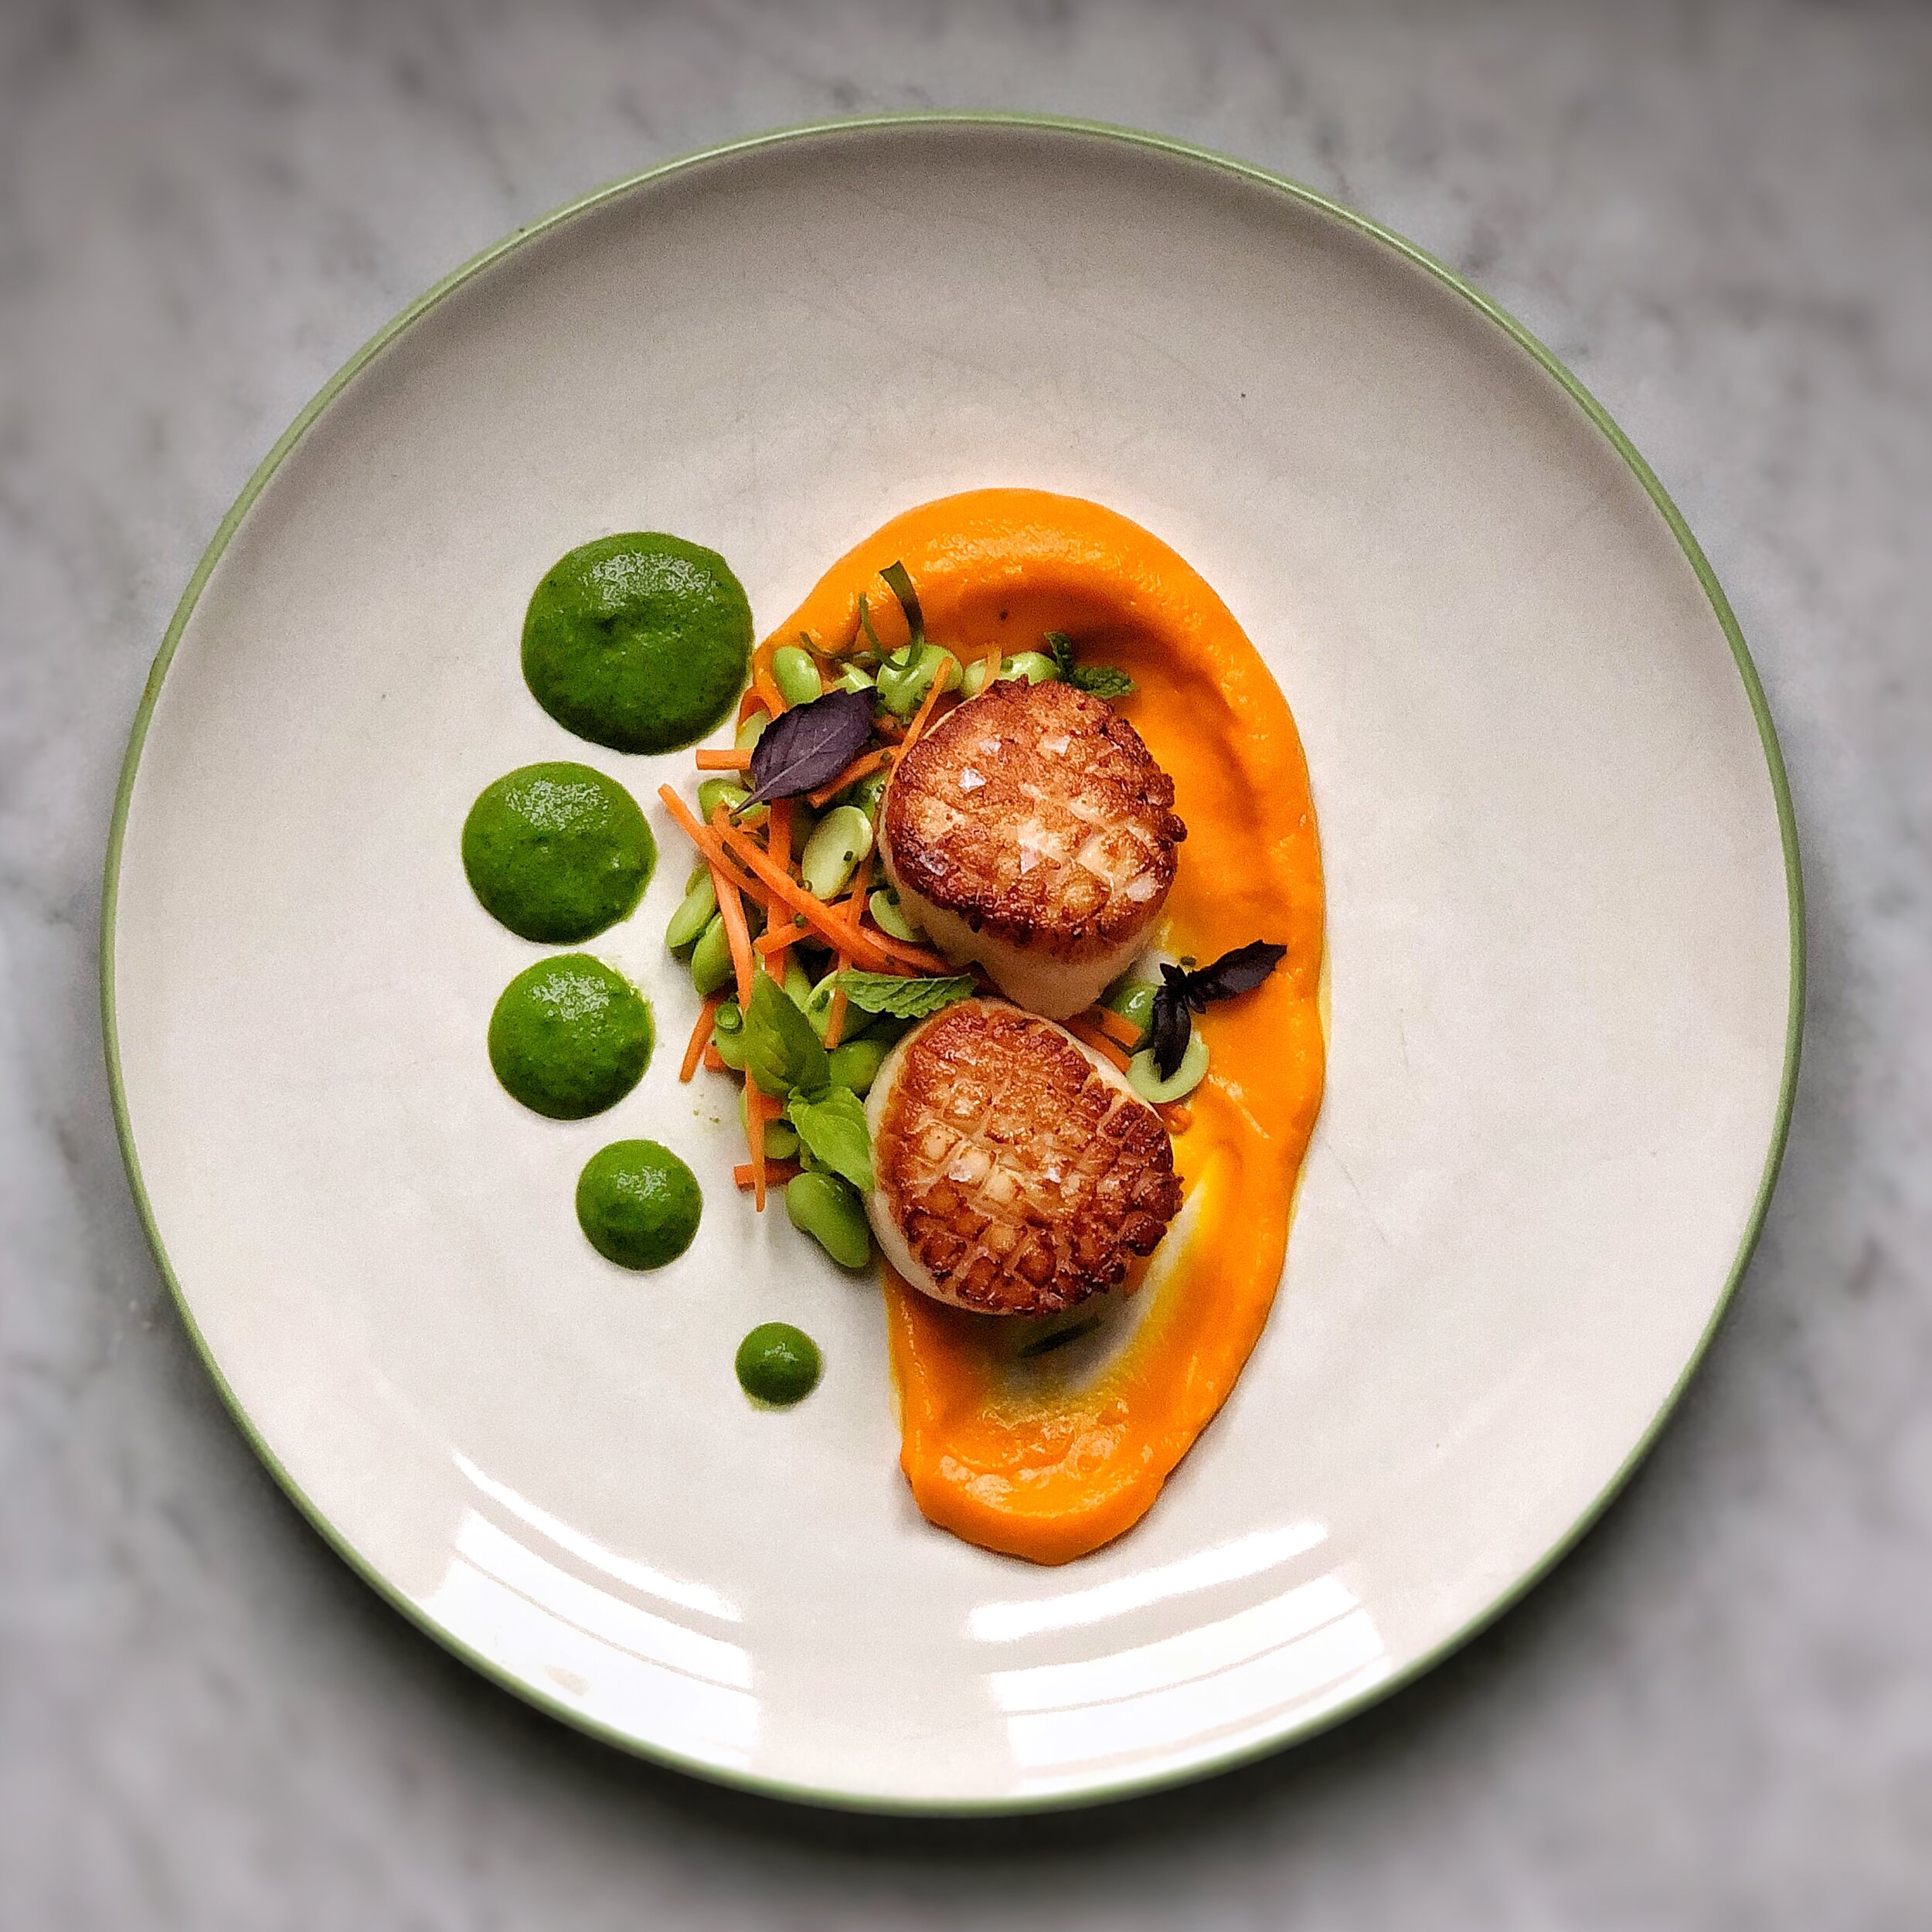 Seared diver scallops over a carrot and coconut puree with edamame and a fresh green curry sauce